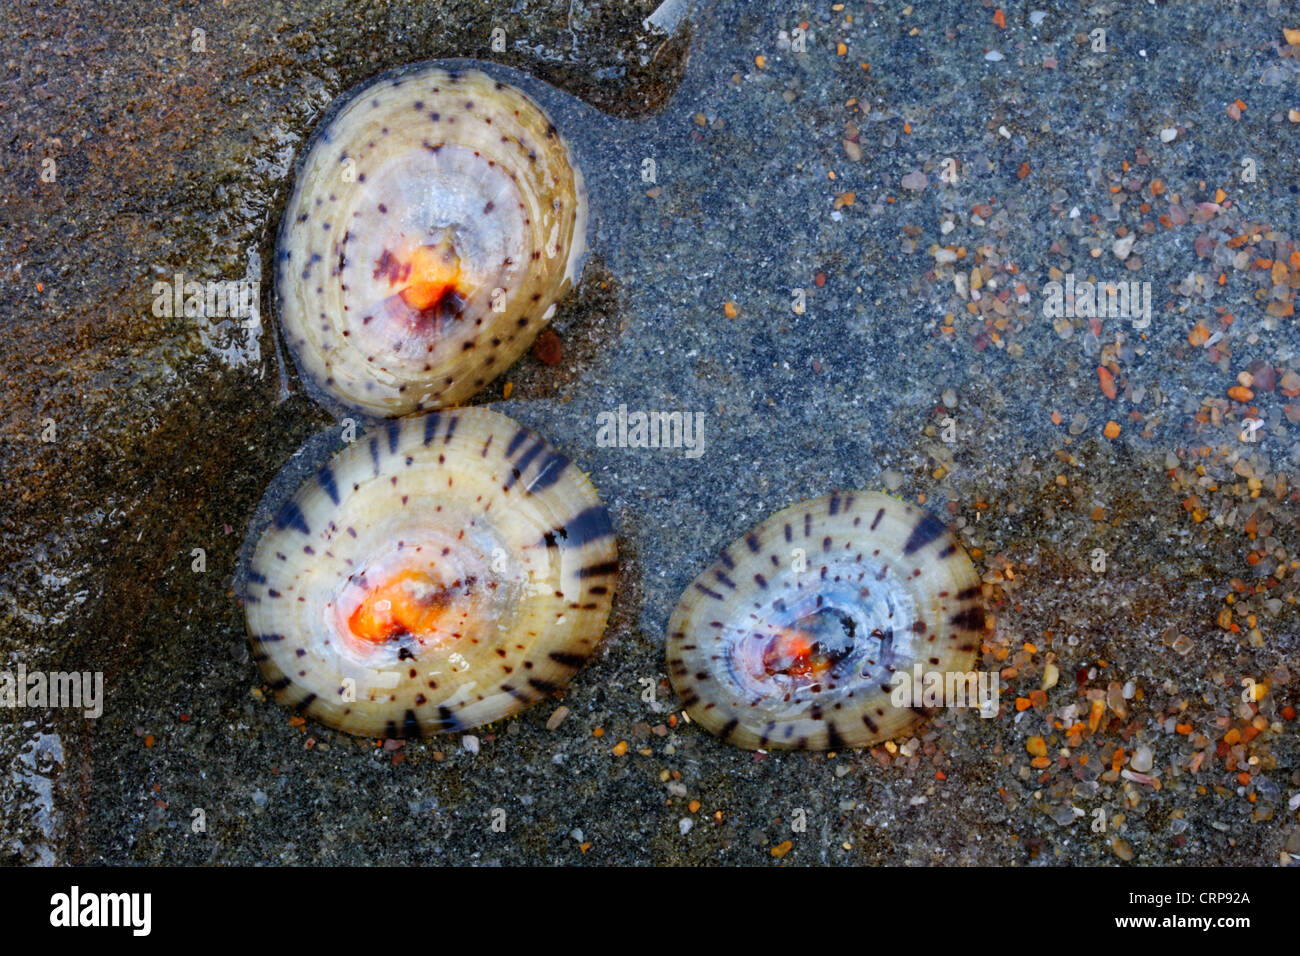 Lustrous limpets (Cellana capensis) attached to a rock in an intertidal zone Stock Photo